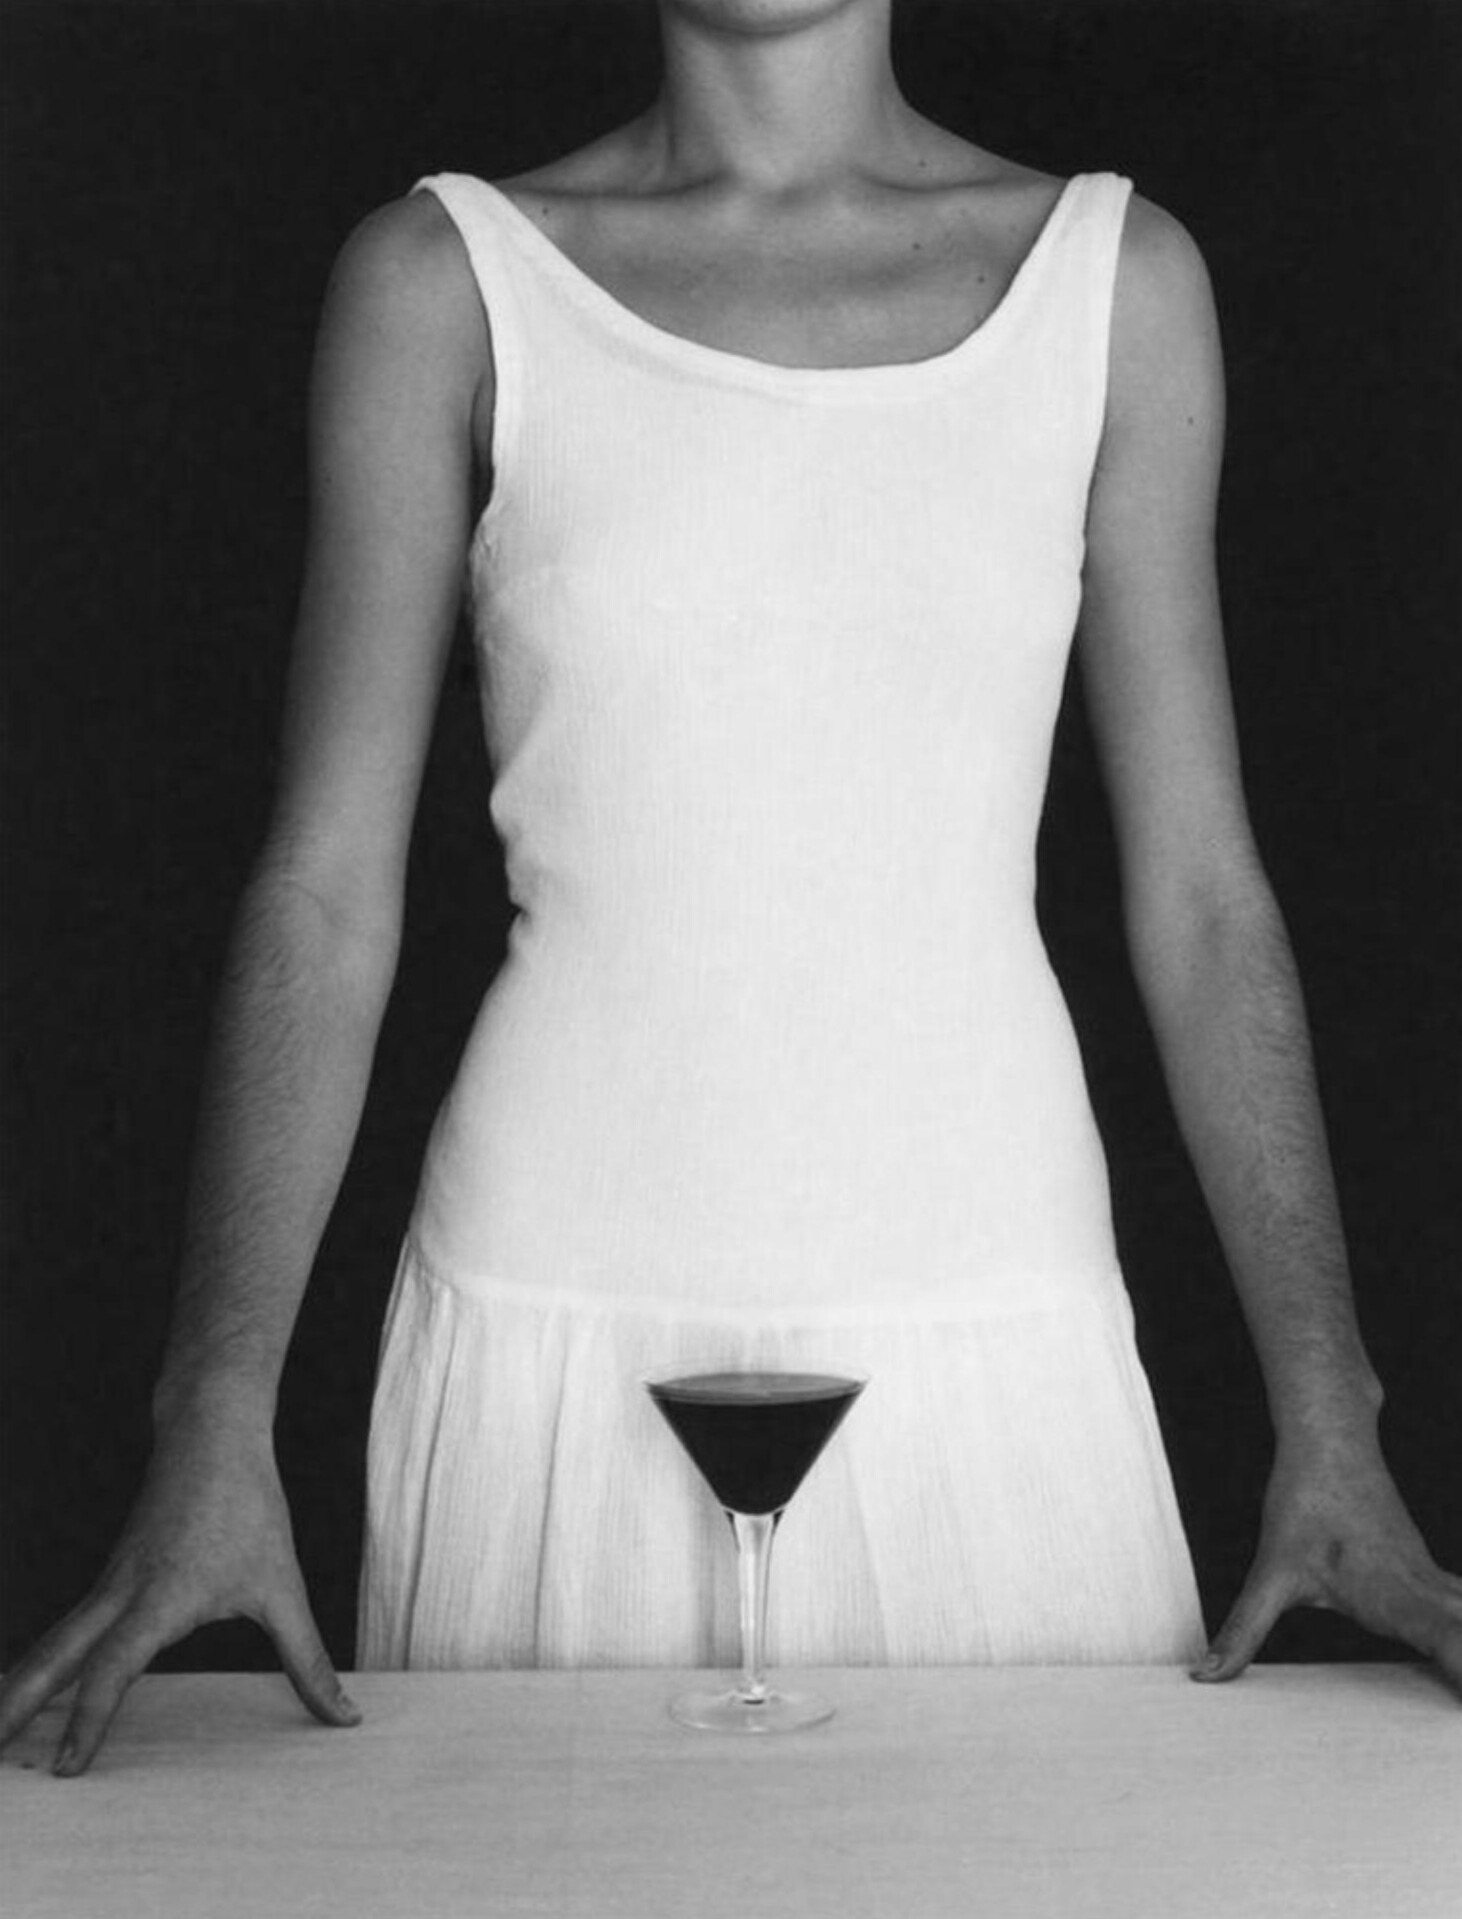 Chema Madoz - Dress and Wine - Catherine Couturier Gallery